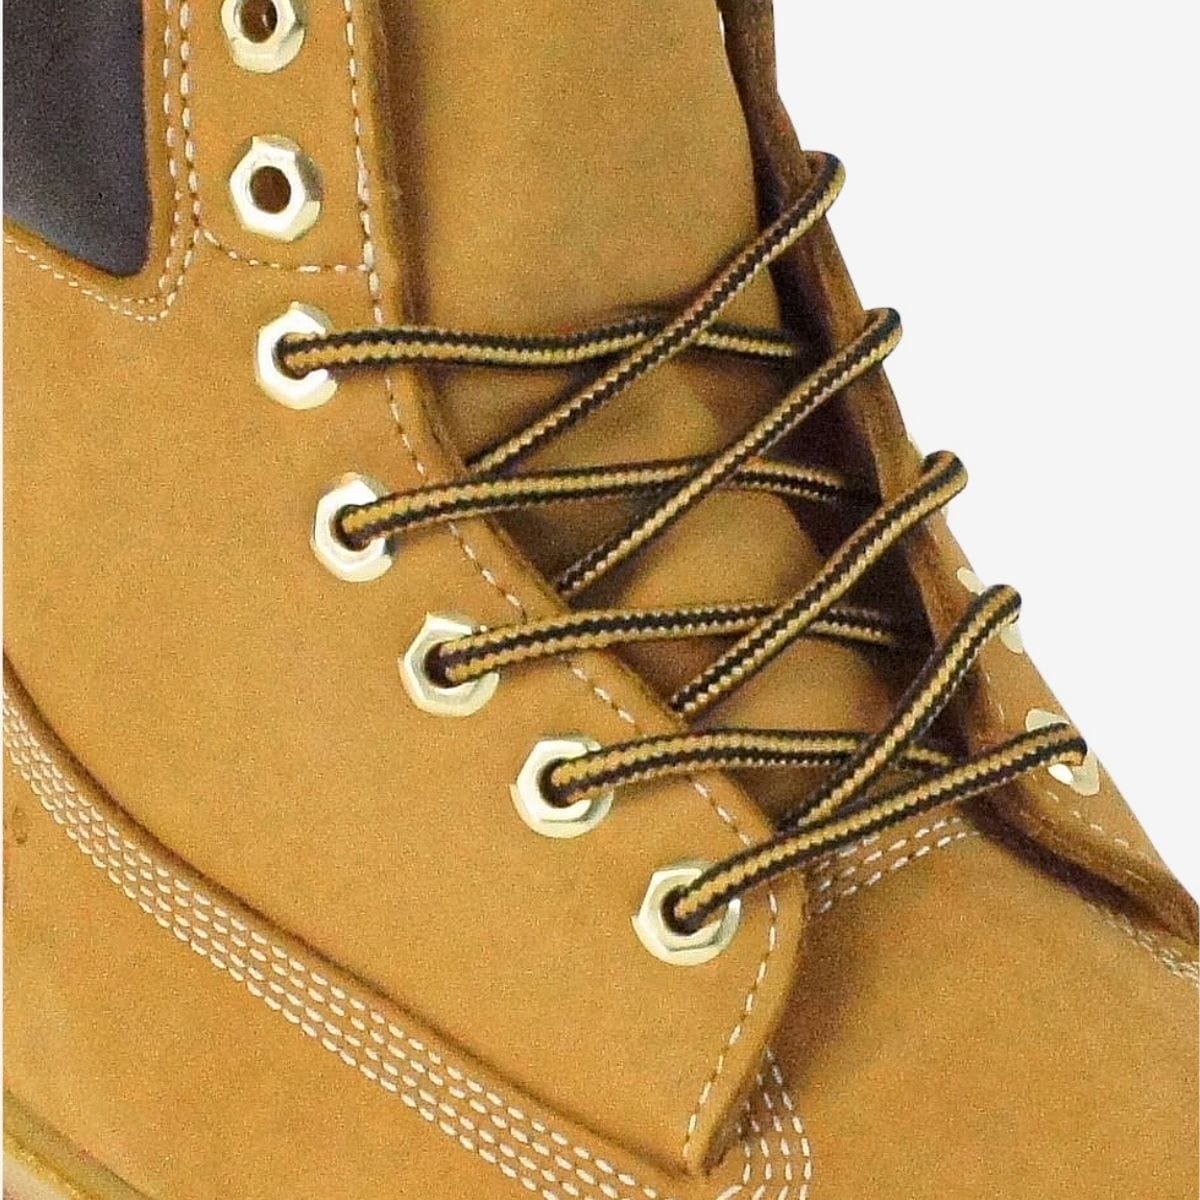 shop-round-shoelaces-online-in-earth-brown-and-black-for-boots-sneakers-and-running-shoes